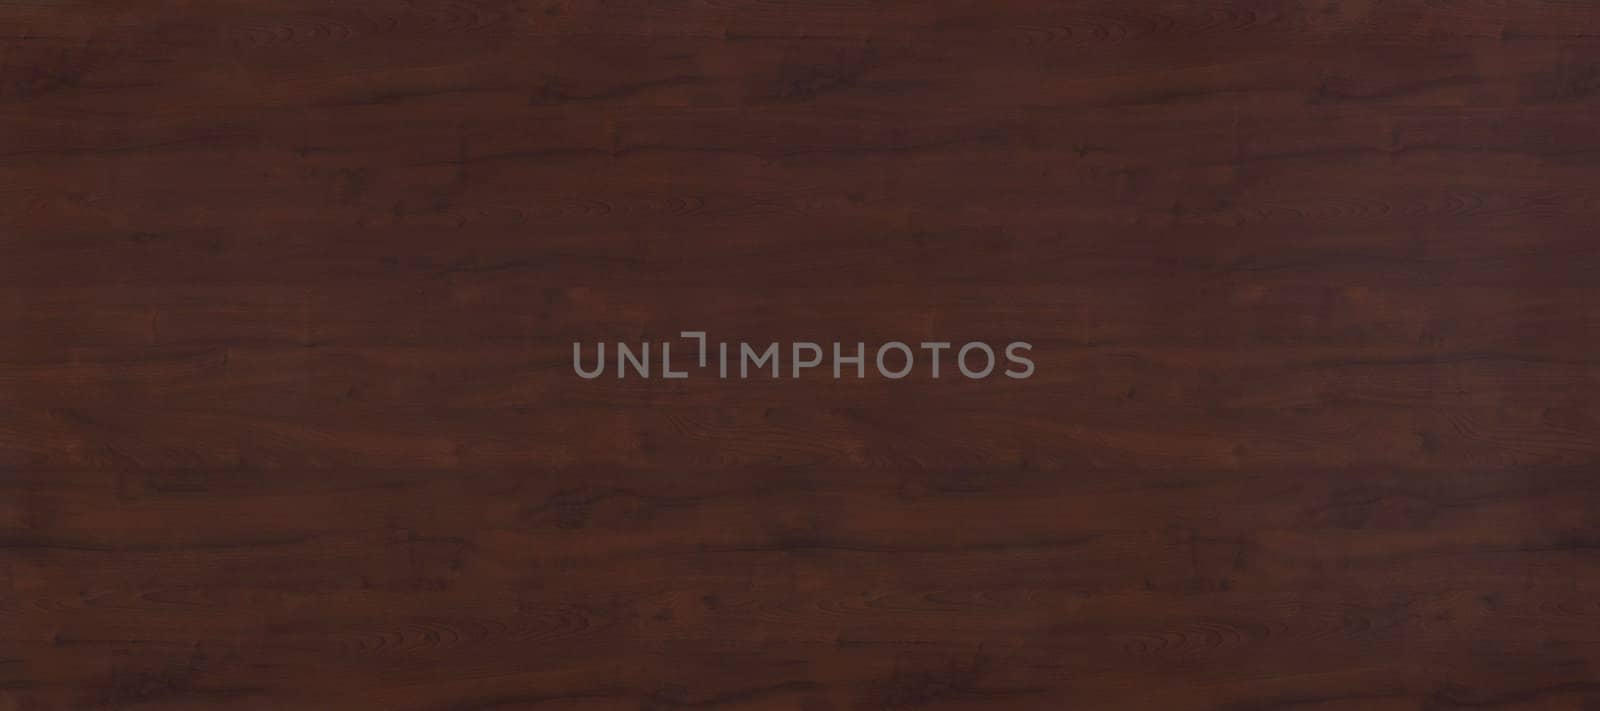 Large grainy wood background or texture